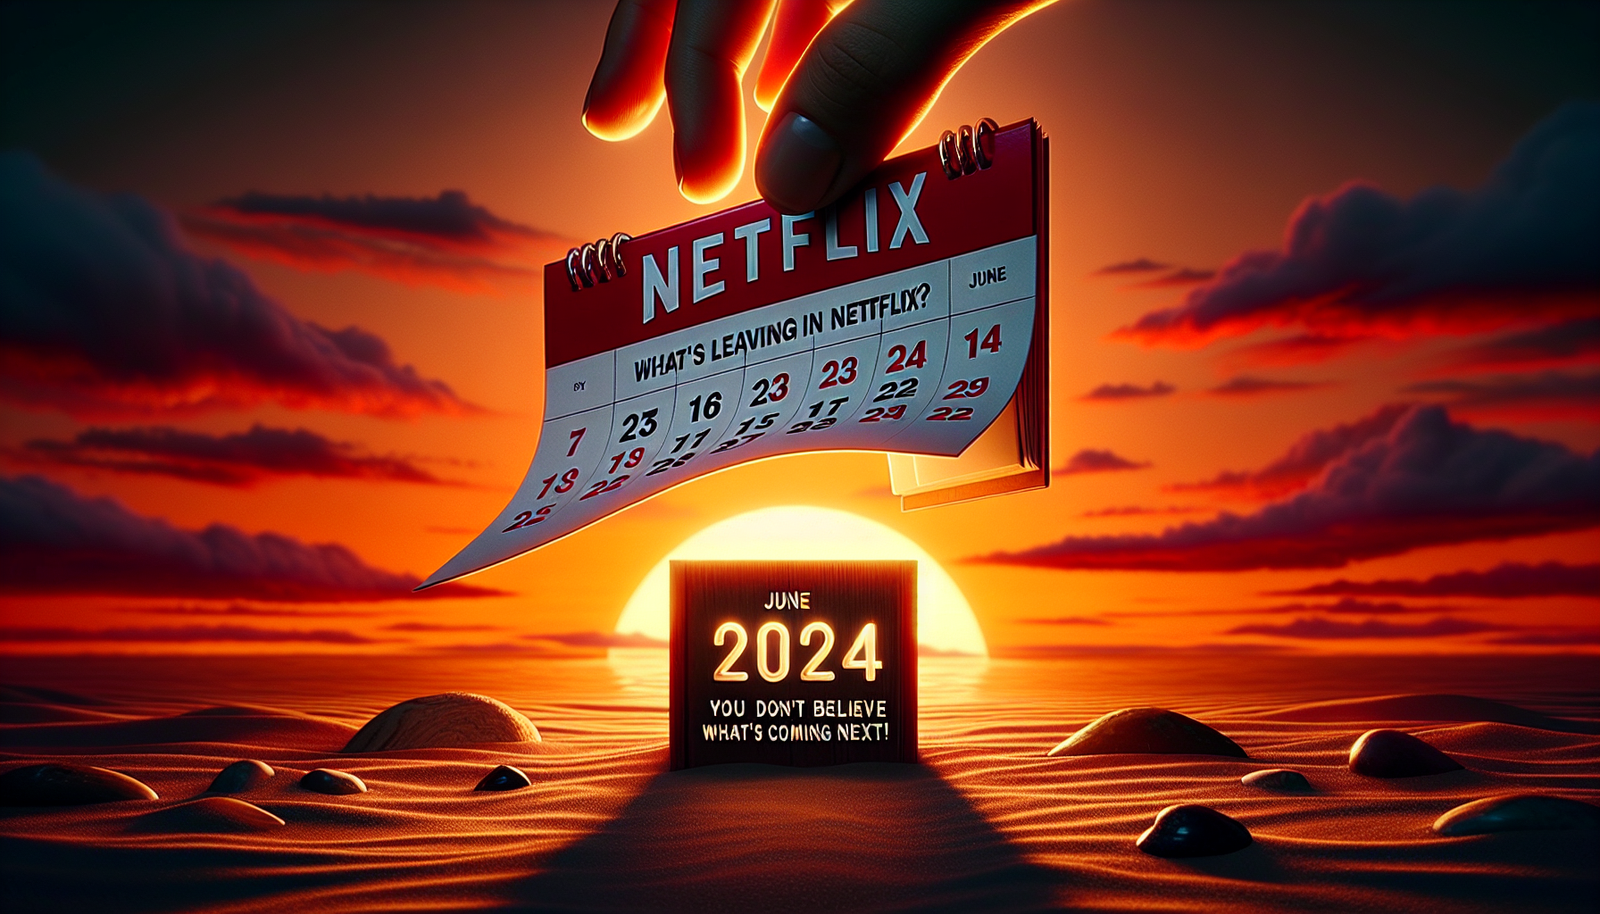 find out what's leaving netflix in june 2024 and get ready to be amazed by what's coming next! don't miss out on the exciting changes ahead!